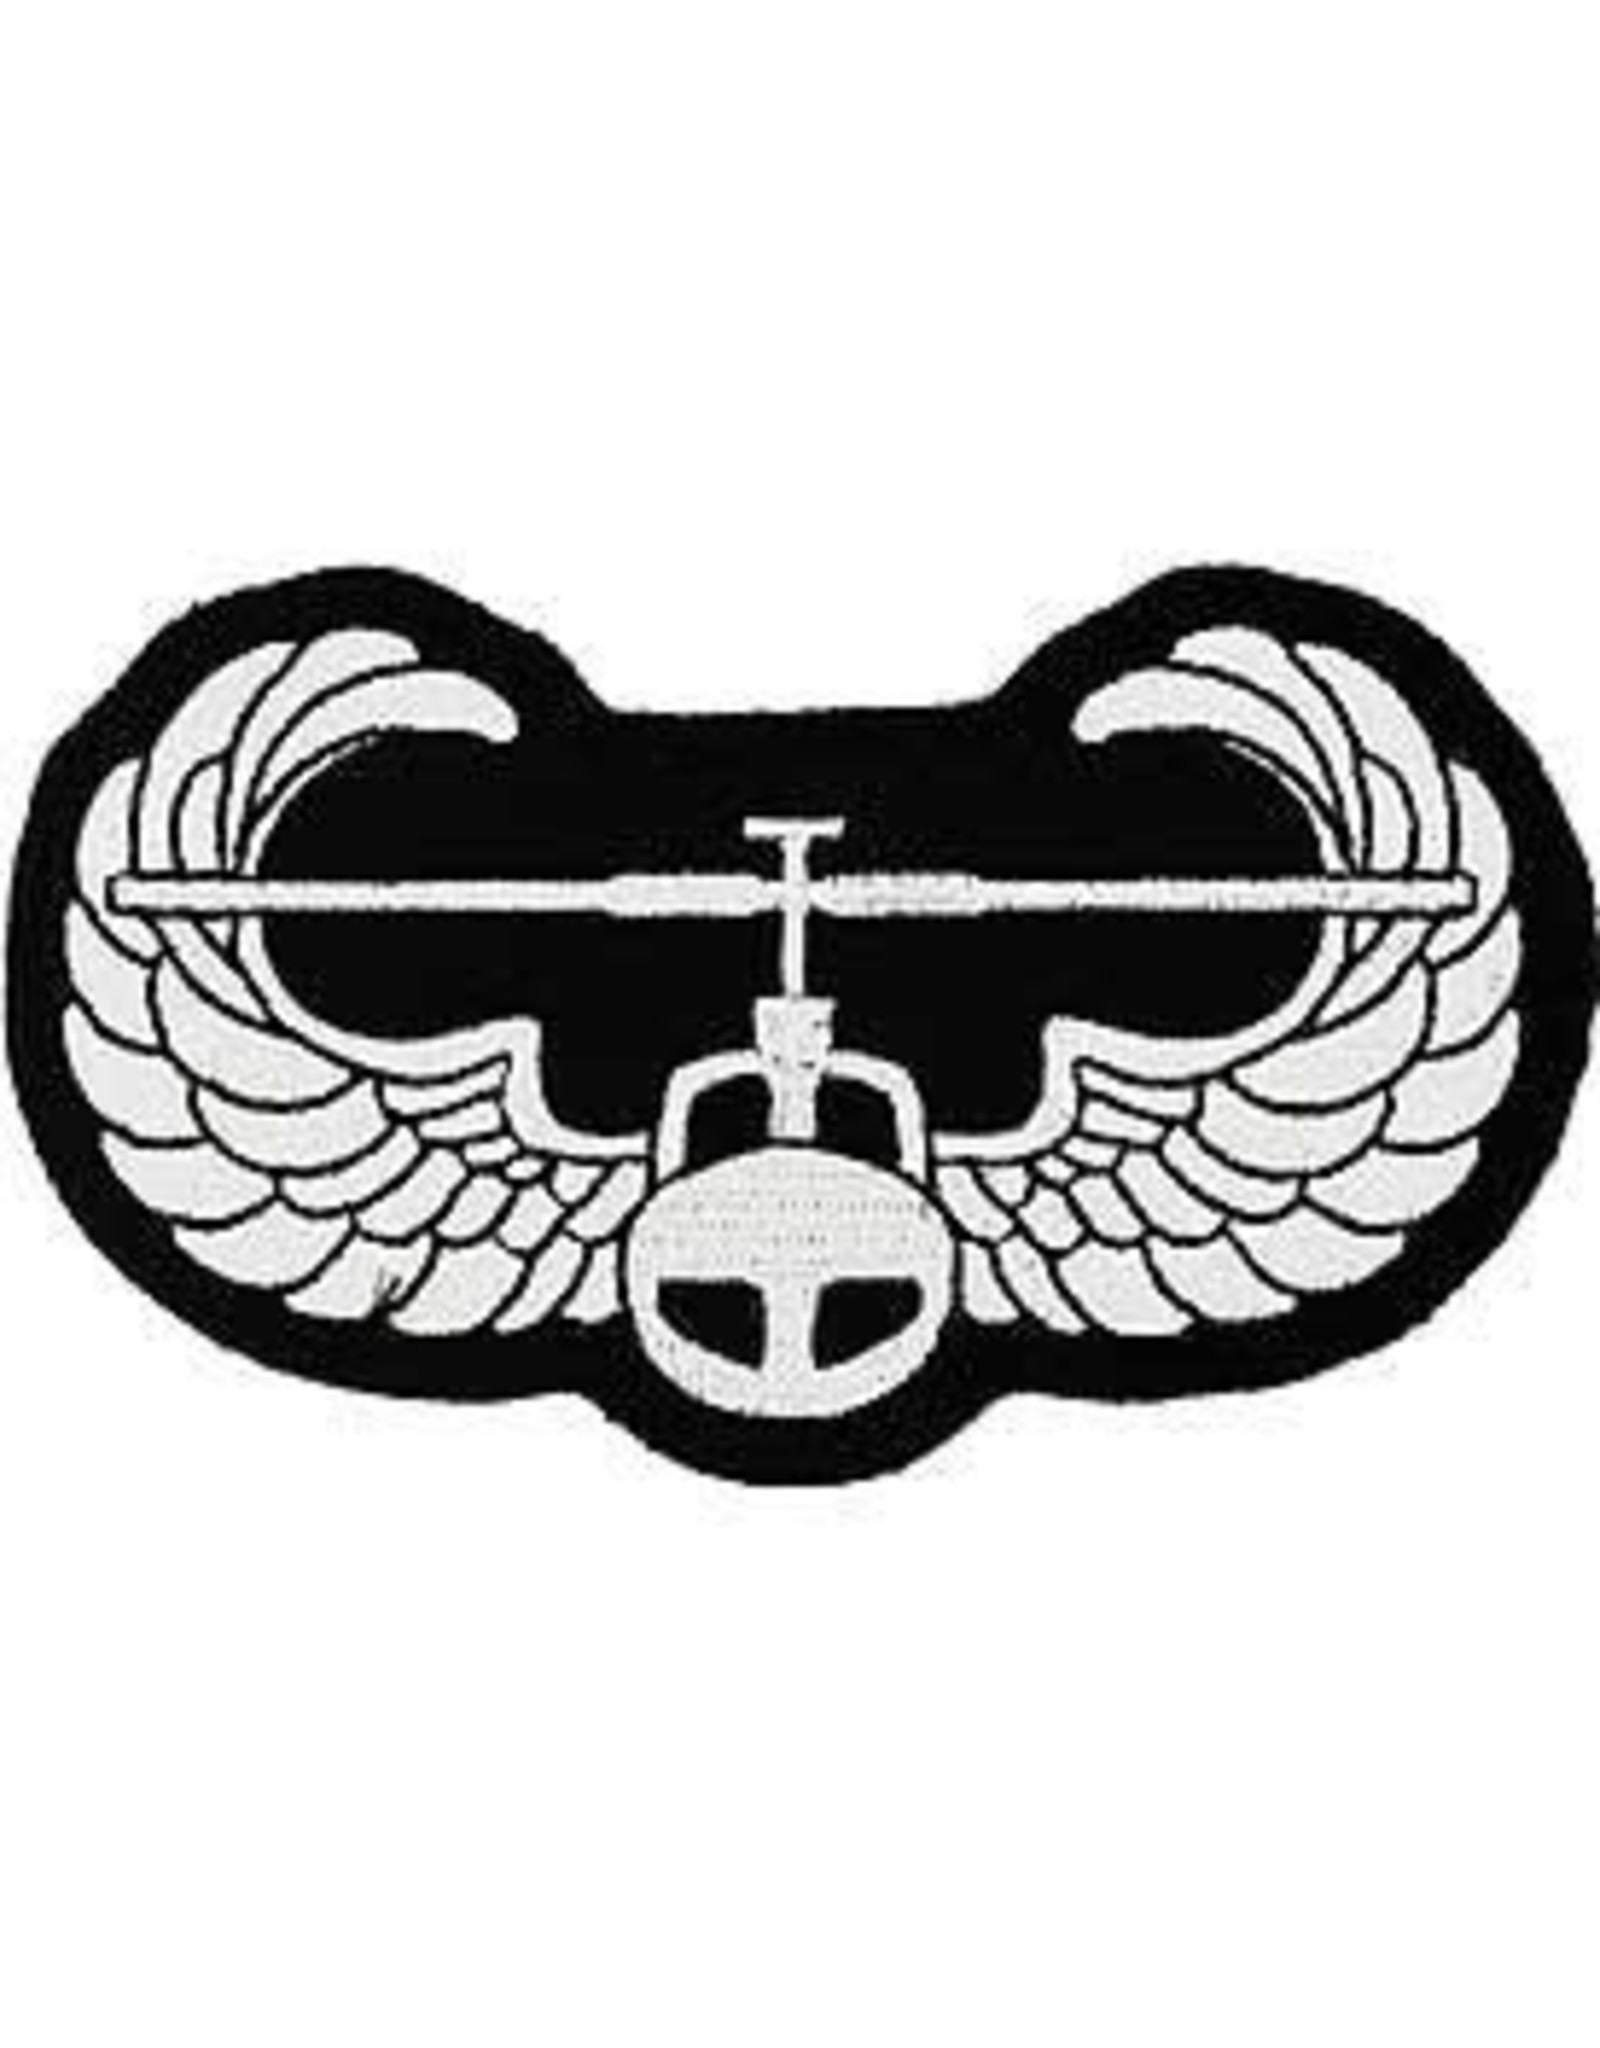 Patch - Army Air Assult Wing